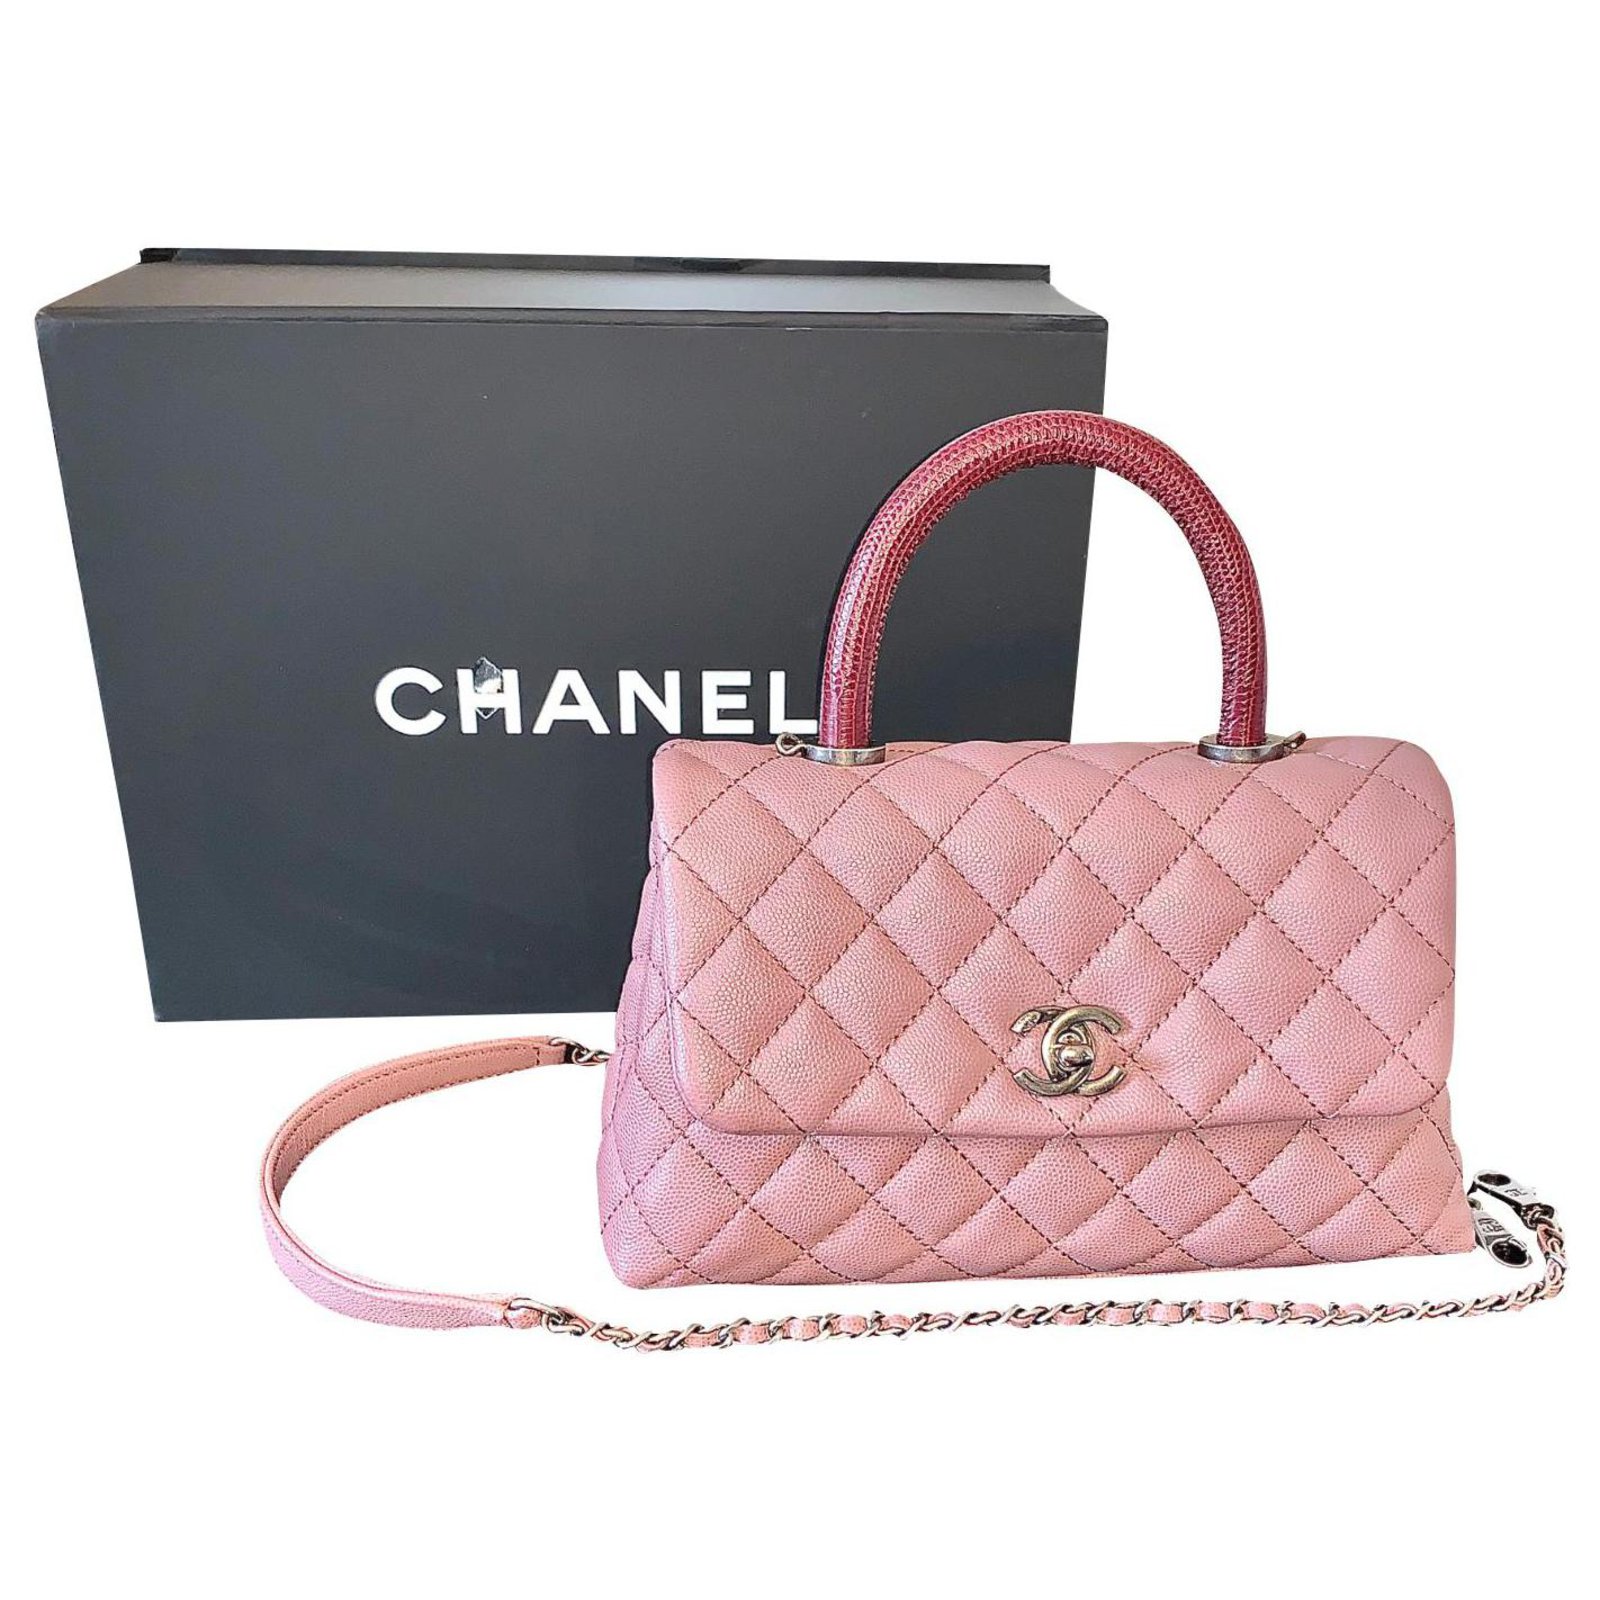 CHANEL Caviar Quilted lizard top Coco Handle Flap Pink Limited